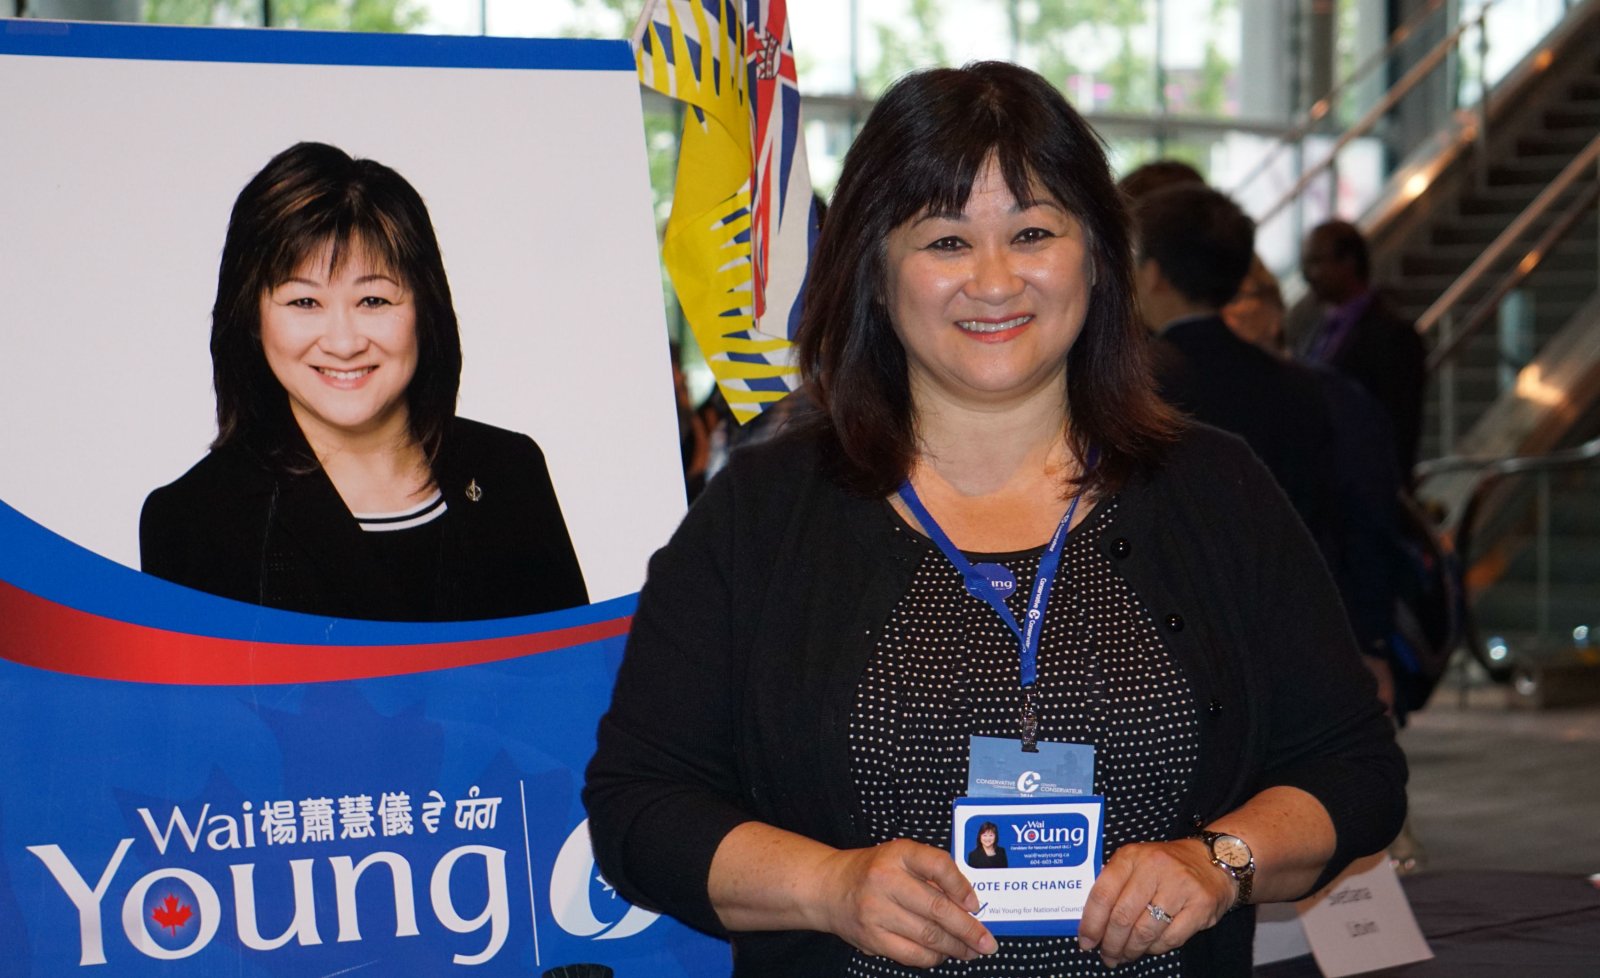 Wai Young, Vancouver South, Conservative Convention, Stephen Harper, National Council